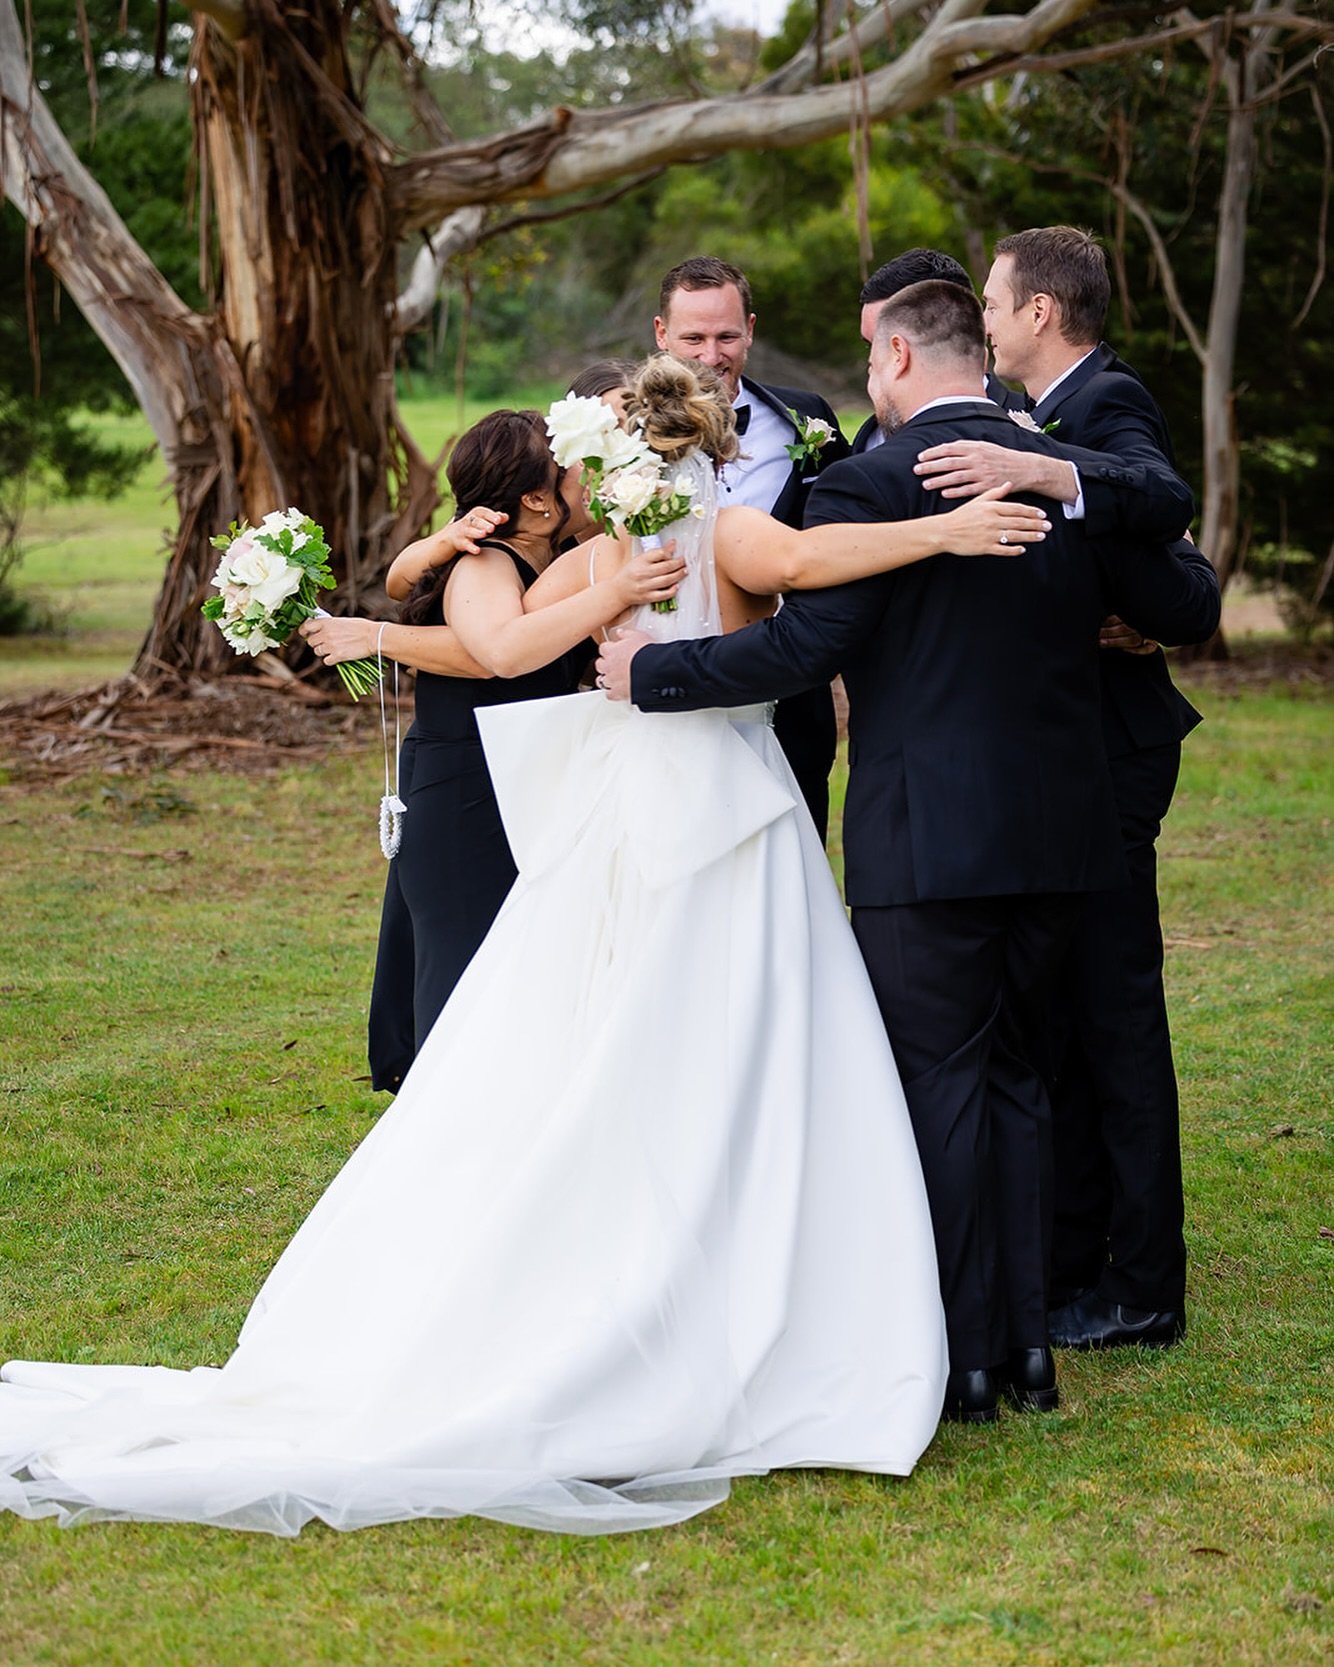 LOVE SCRUM. A post ceremony cuddle with their wedding party, captured by @jesswhitephotography. 
.
I wont leave you hanging at the end of the aisle after the recessional- promise! As soon as the tog has the jubilant aisle shots I&rsquo;ll start sendi